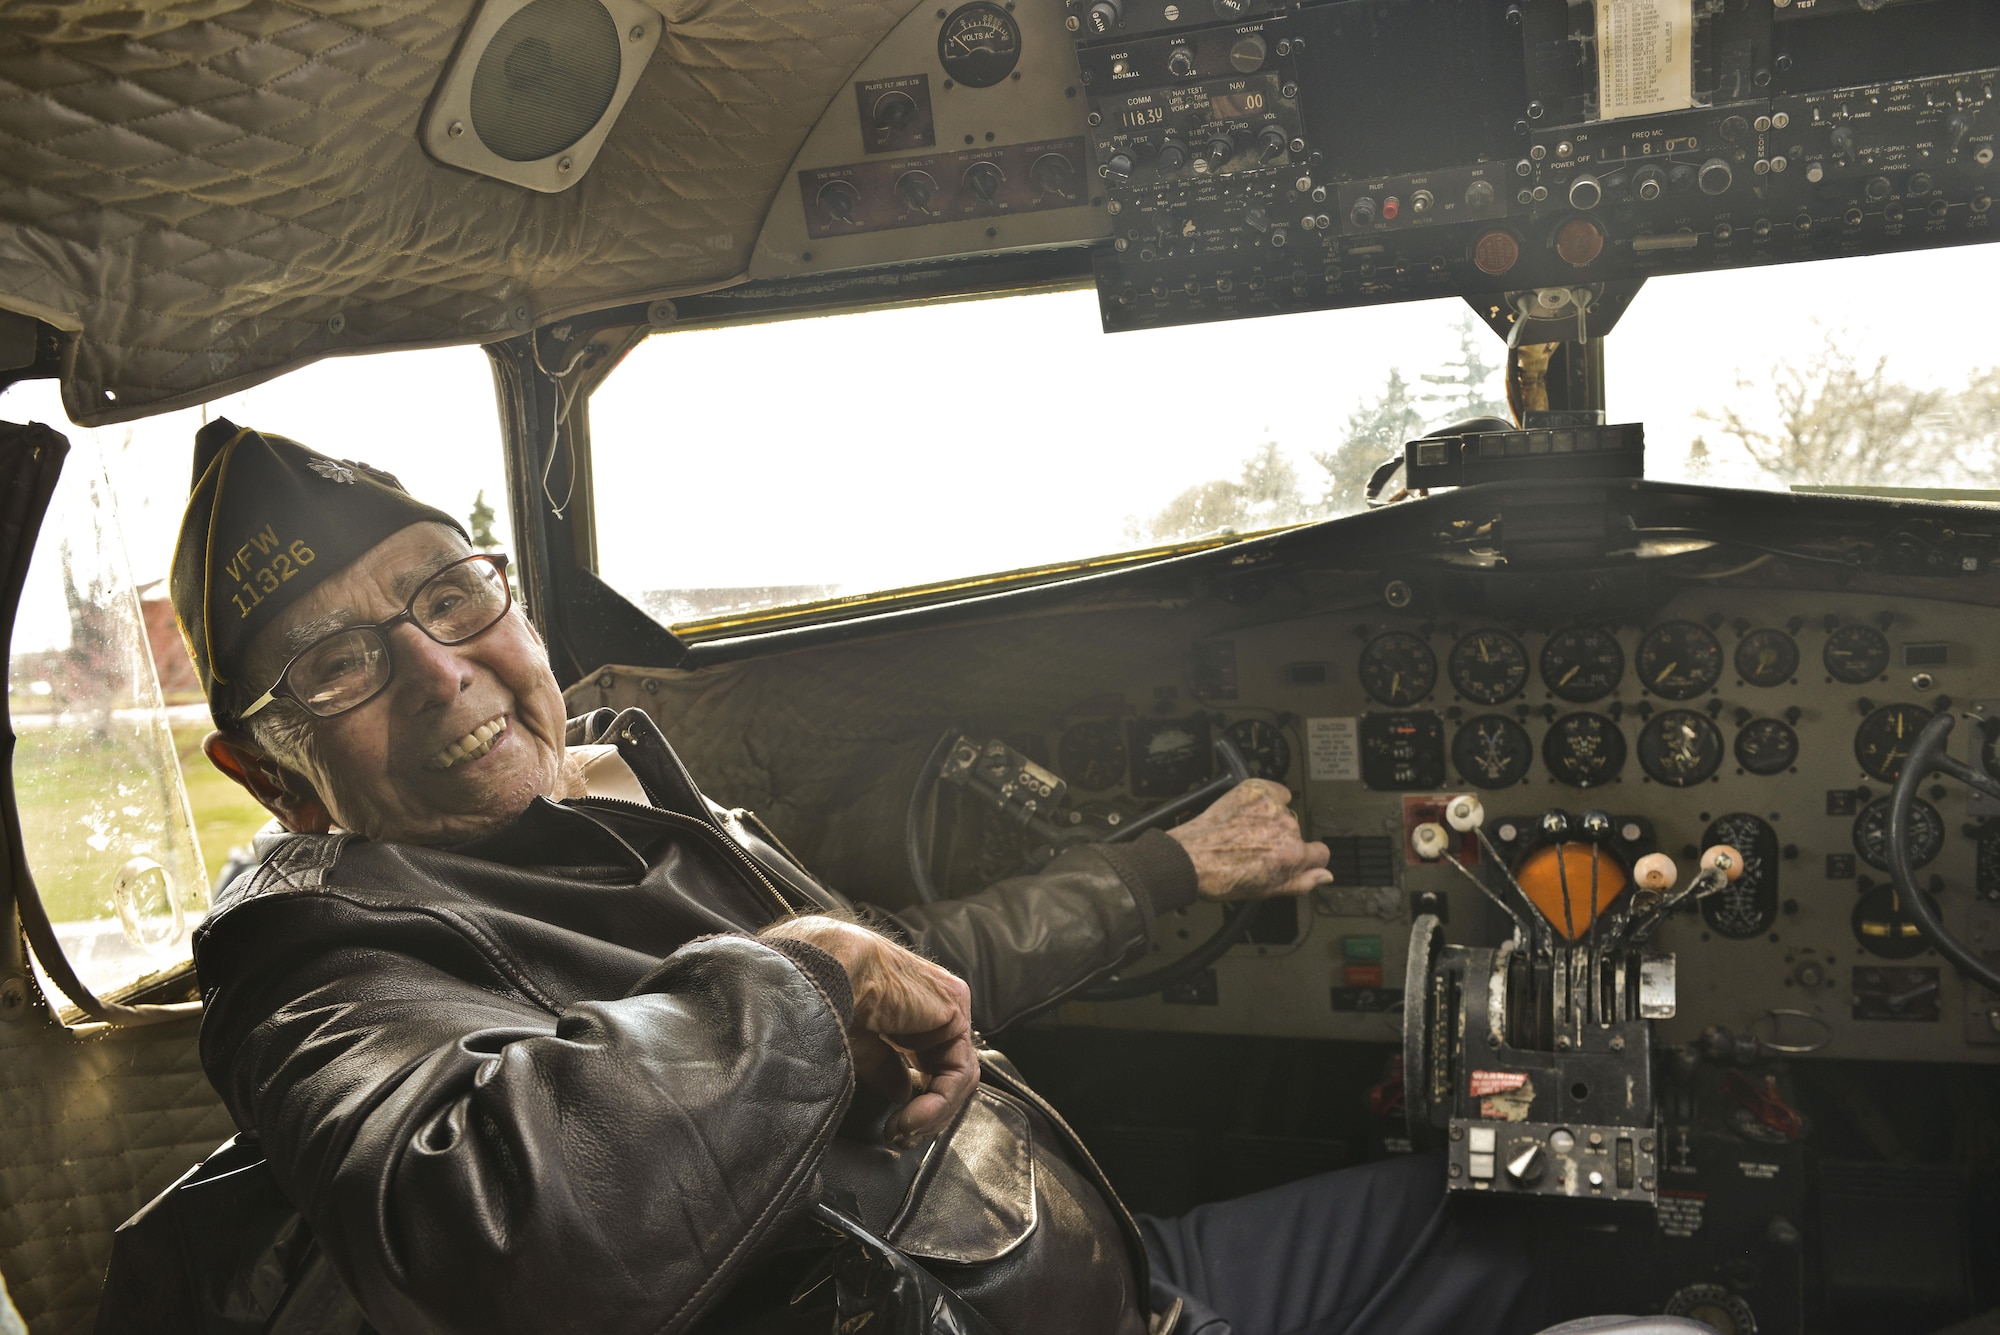 Retired Lt. Col. Alston Daniels beams as he sits in the cockpit of a Douglas C-47D Skytrain for the first time since 1962 April 7, 2015, at Fairchild Air Force Base, Wash. Daniels flew the C-47 during World War II and had the chance to visit the aircraft while it is on static display. (U.S. Air Force photo/Staff Sgt. Alex Montes)